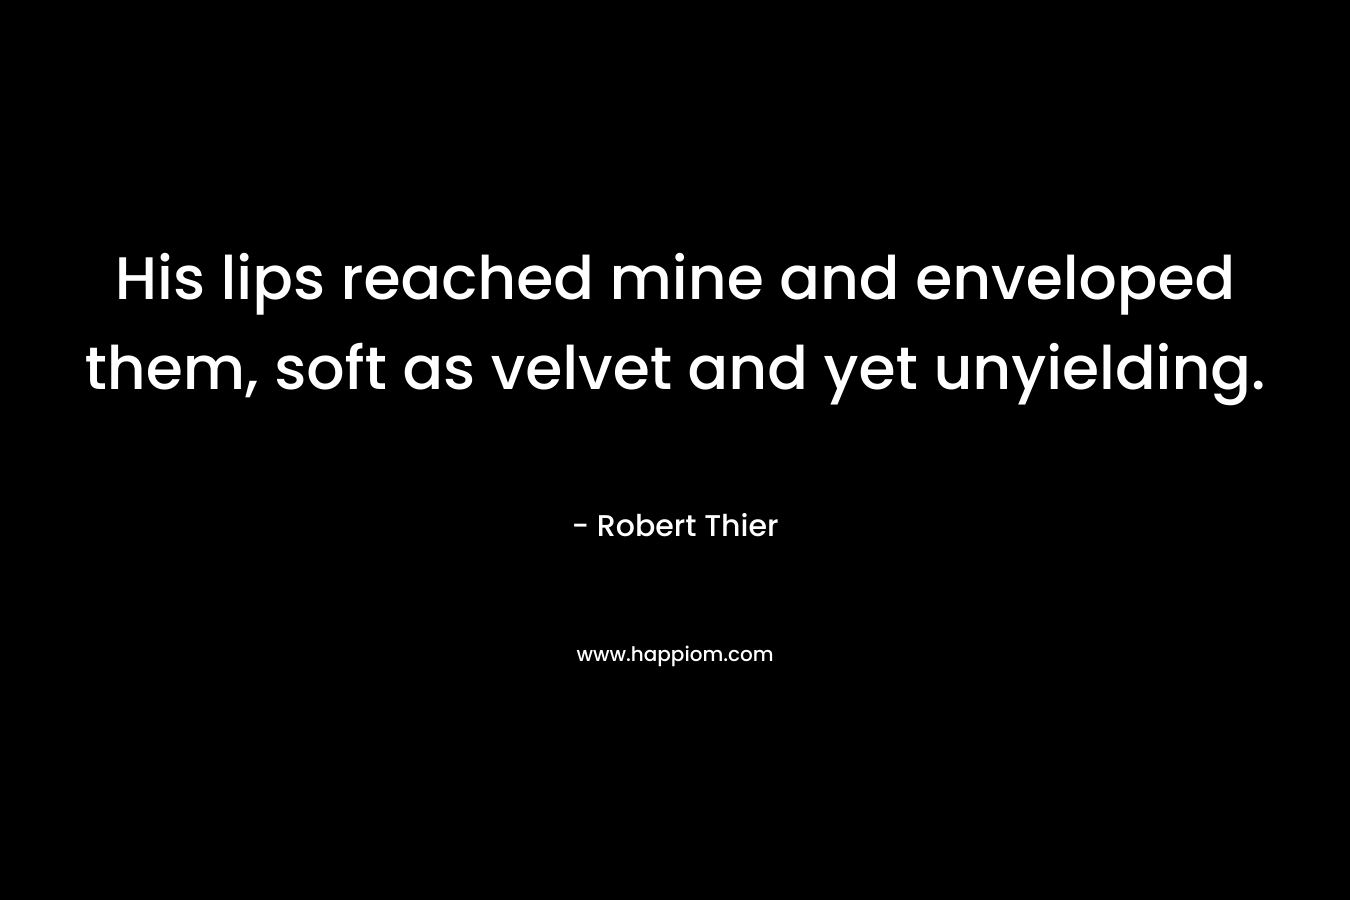 His lips reached mine and enveloped them, soft as velvet and yet unyielding. – Robert Thier